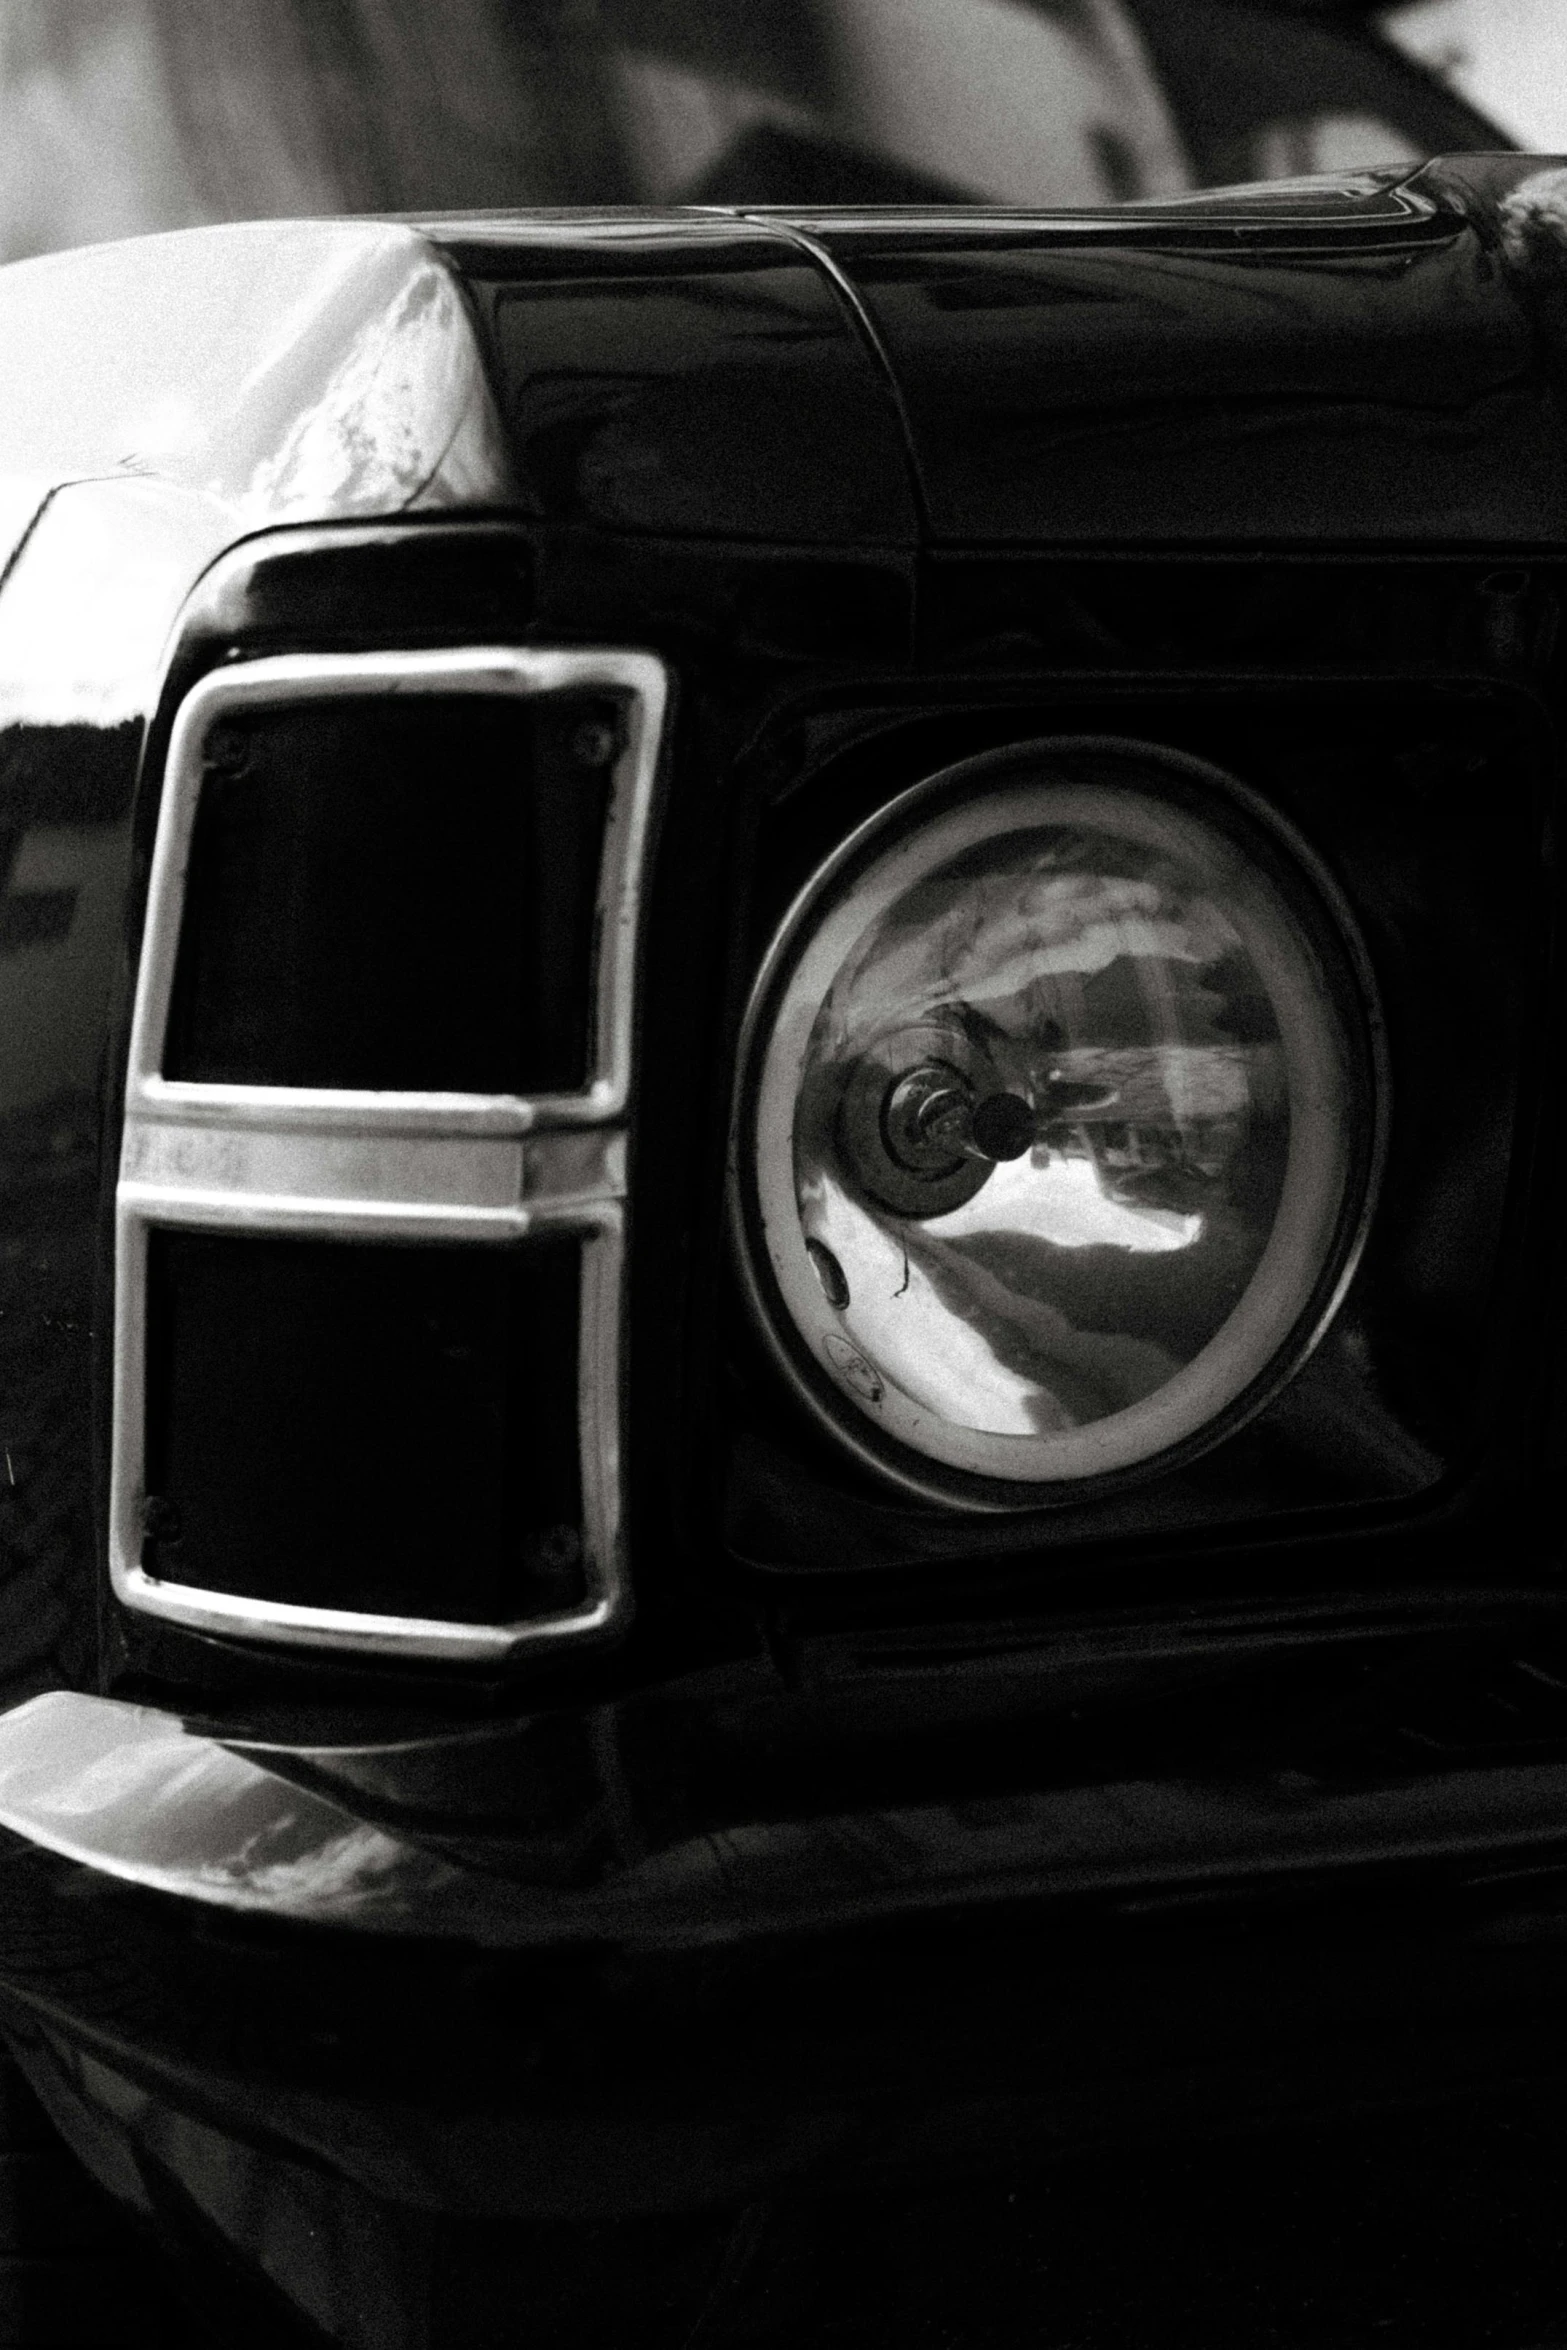 a close up of the front grill of a car